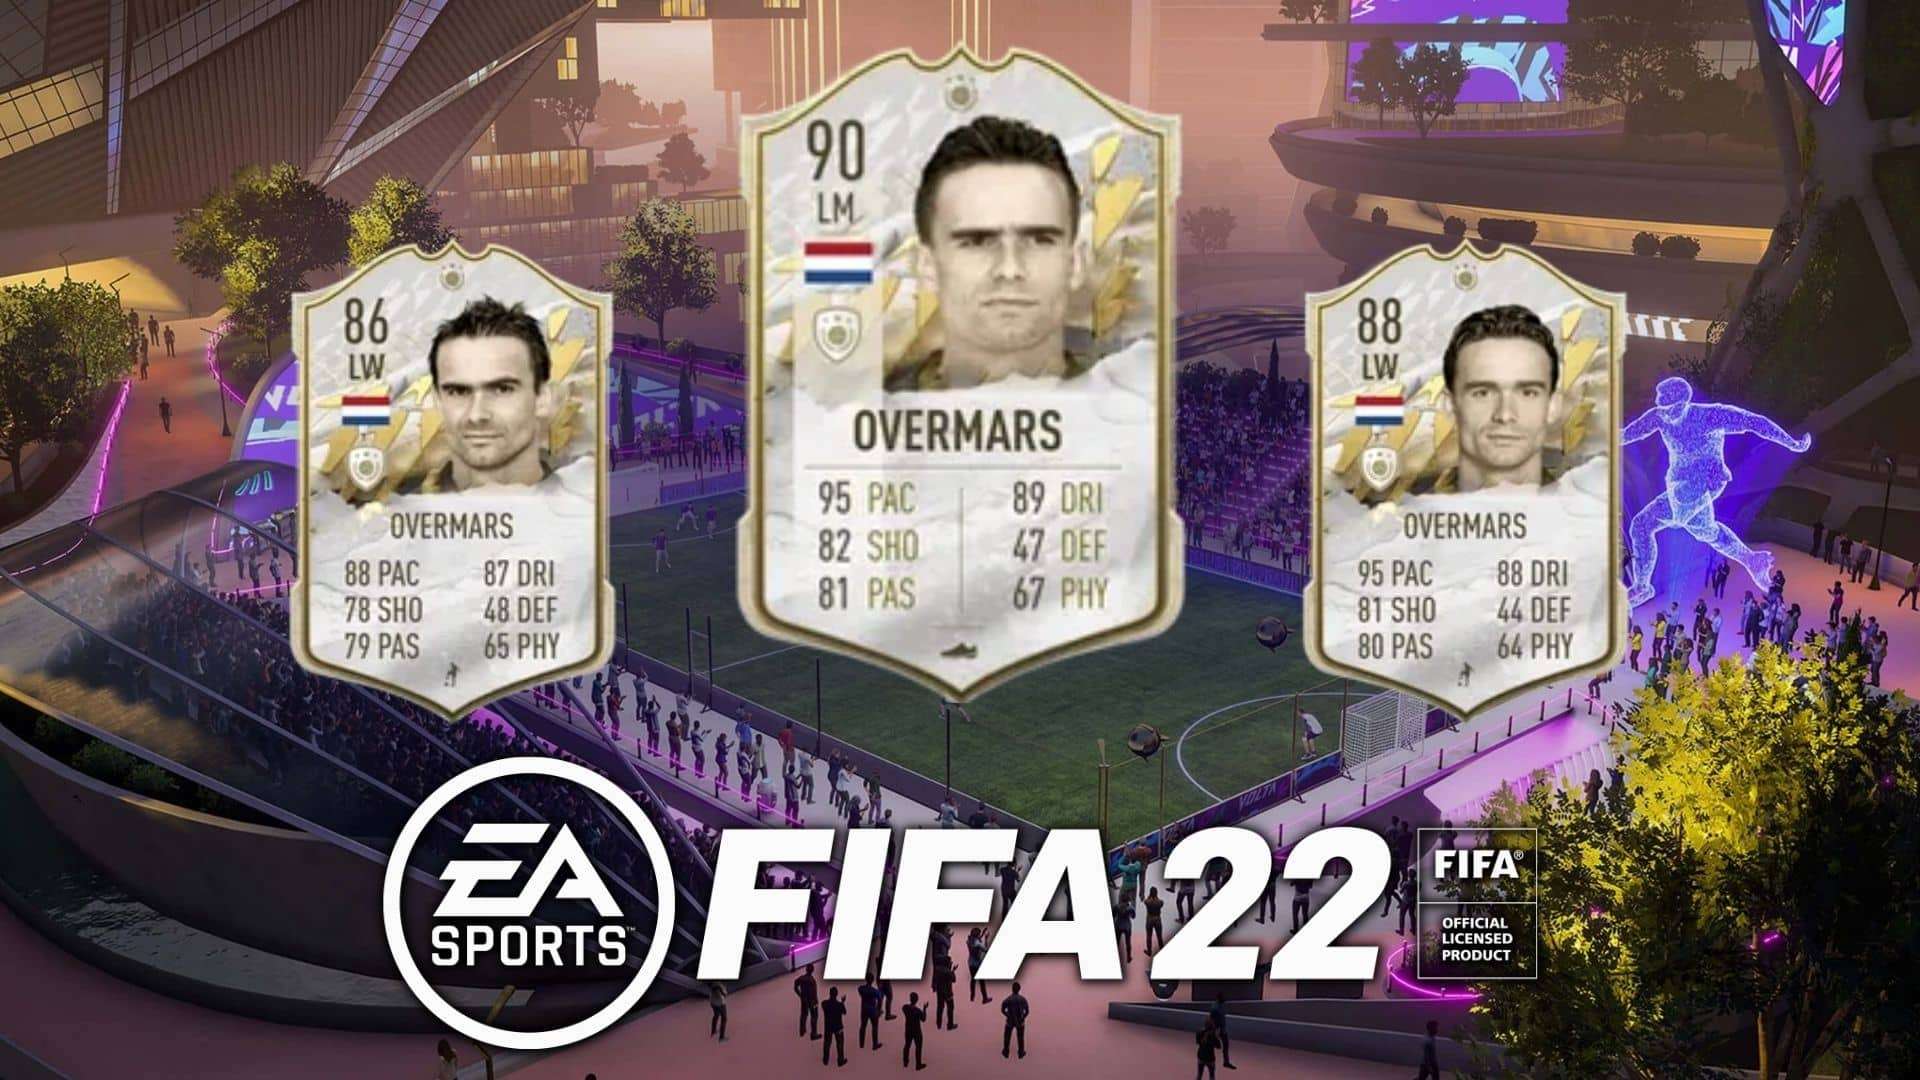 marc overmars icon cards